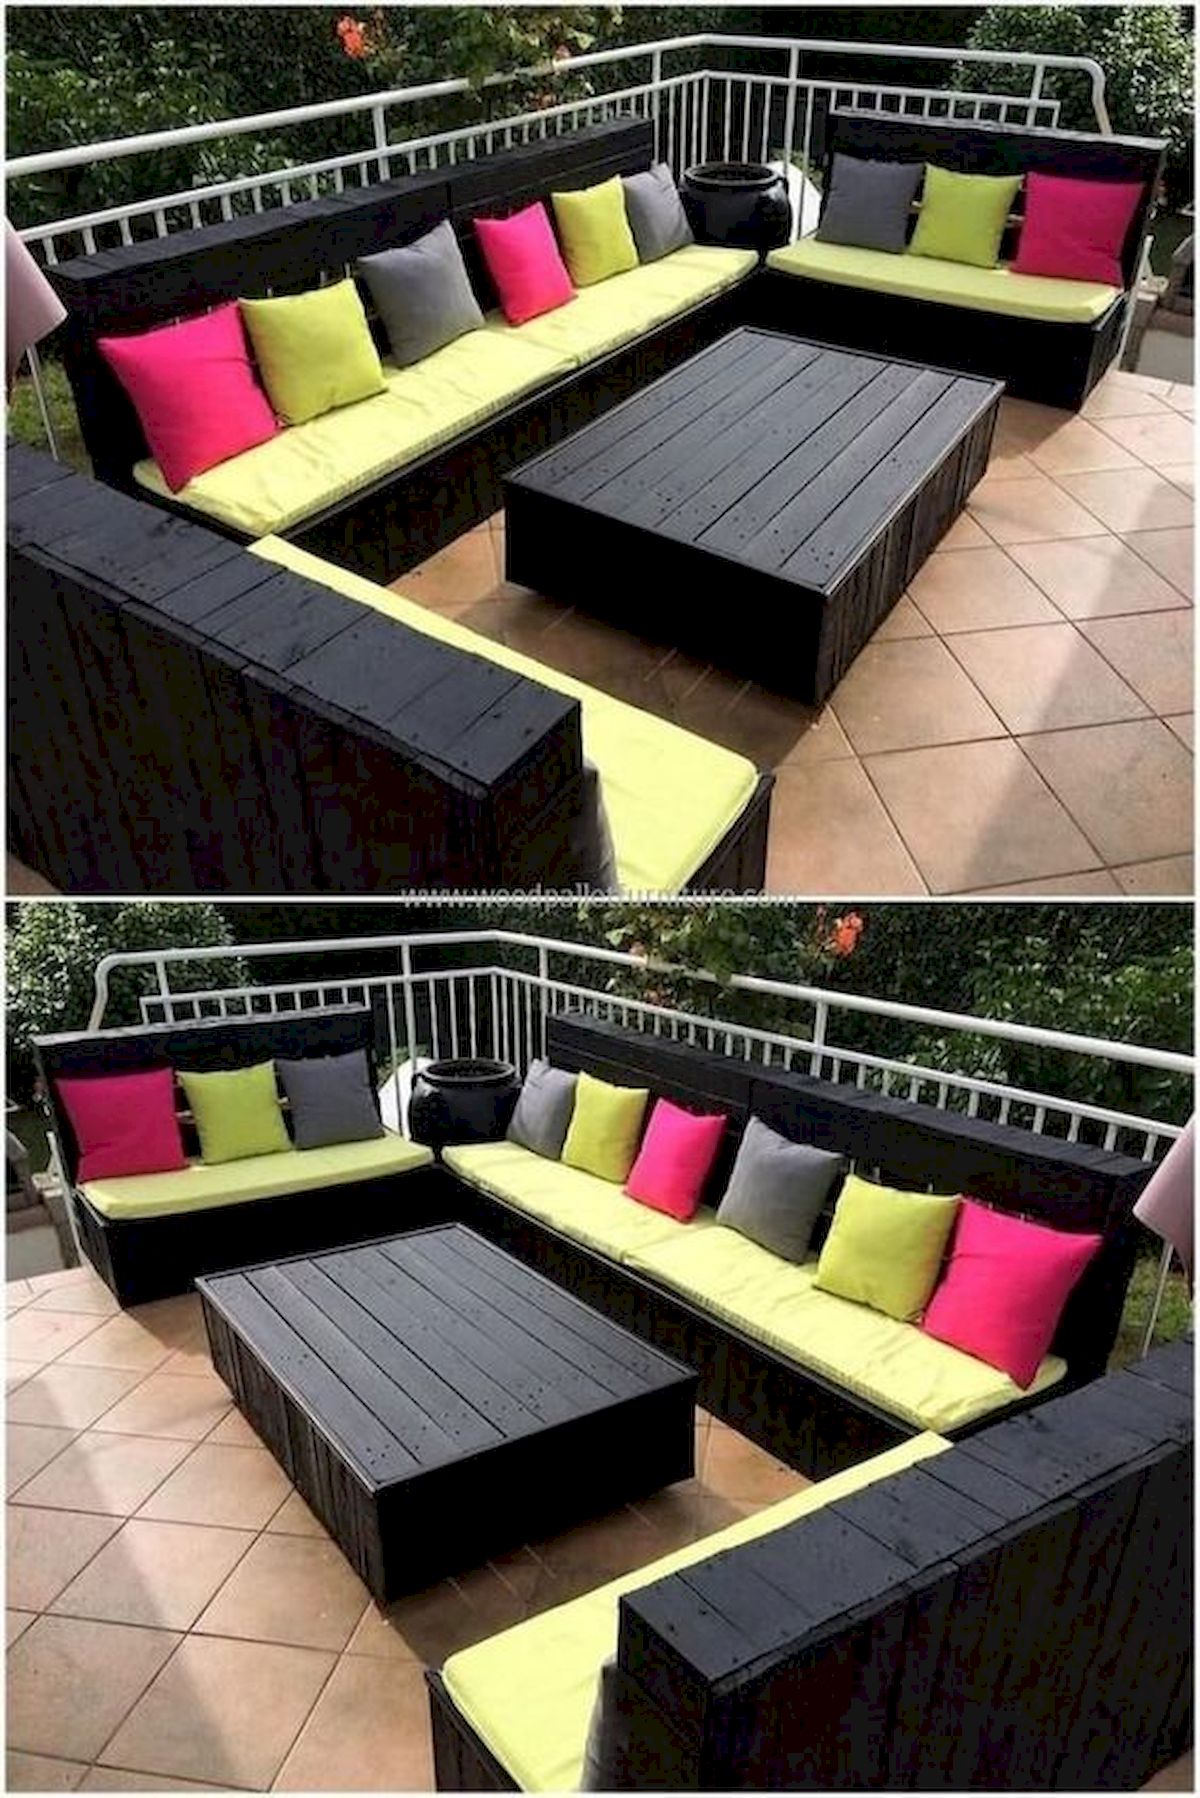 50 Amazing DIY Projects Outdoor Furniture Design Ideas (42)